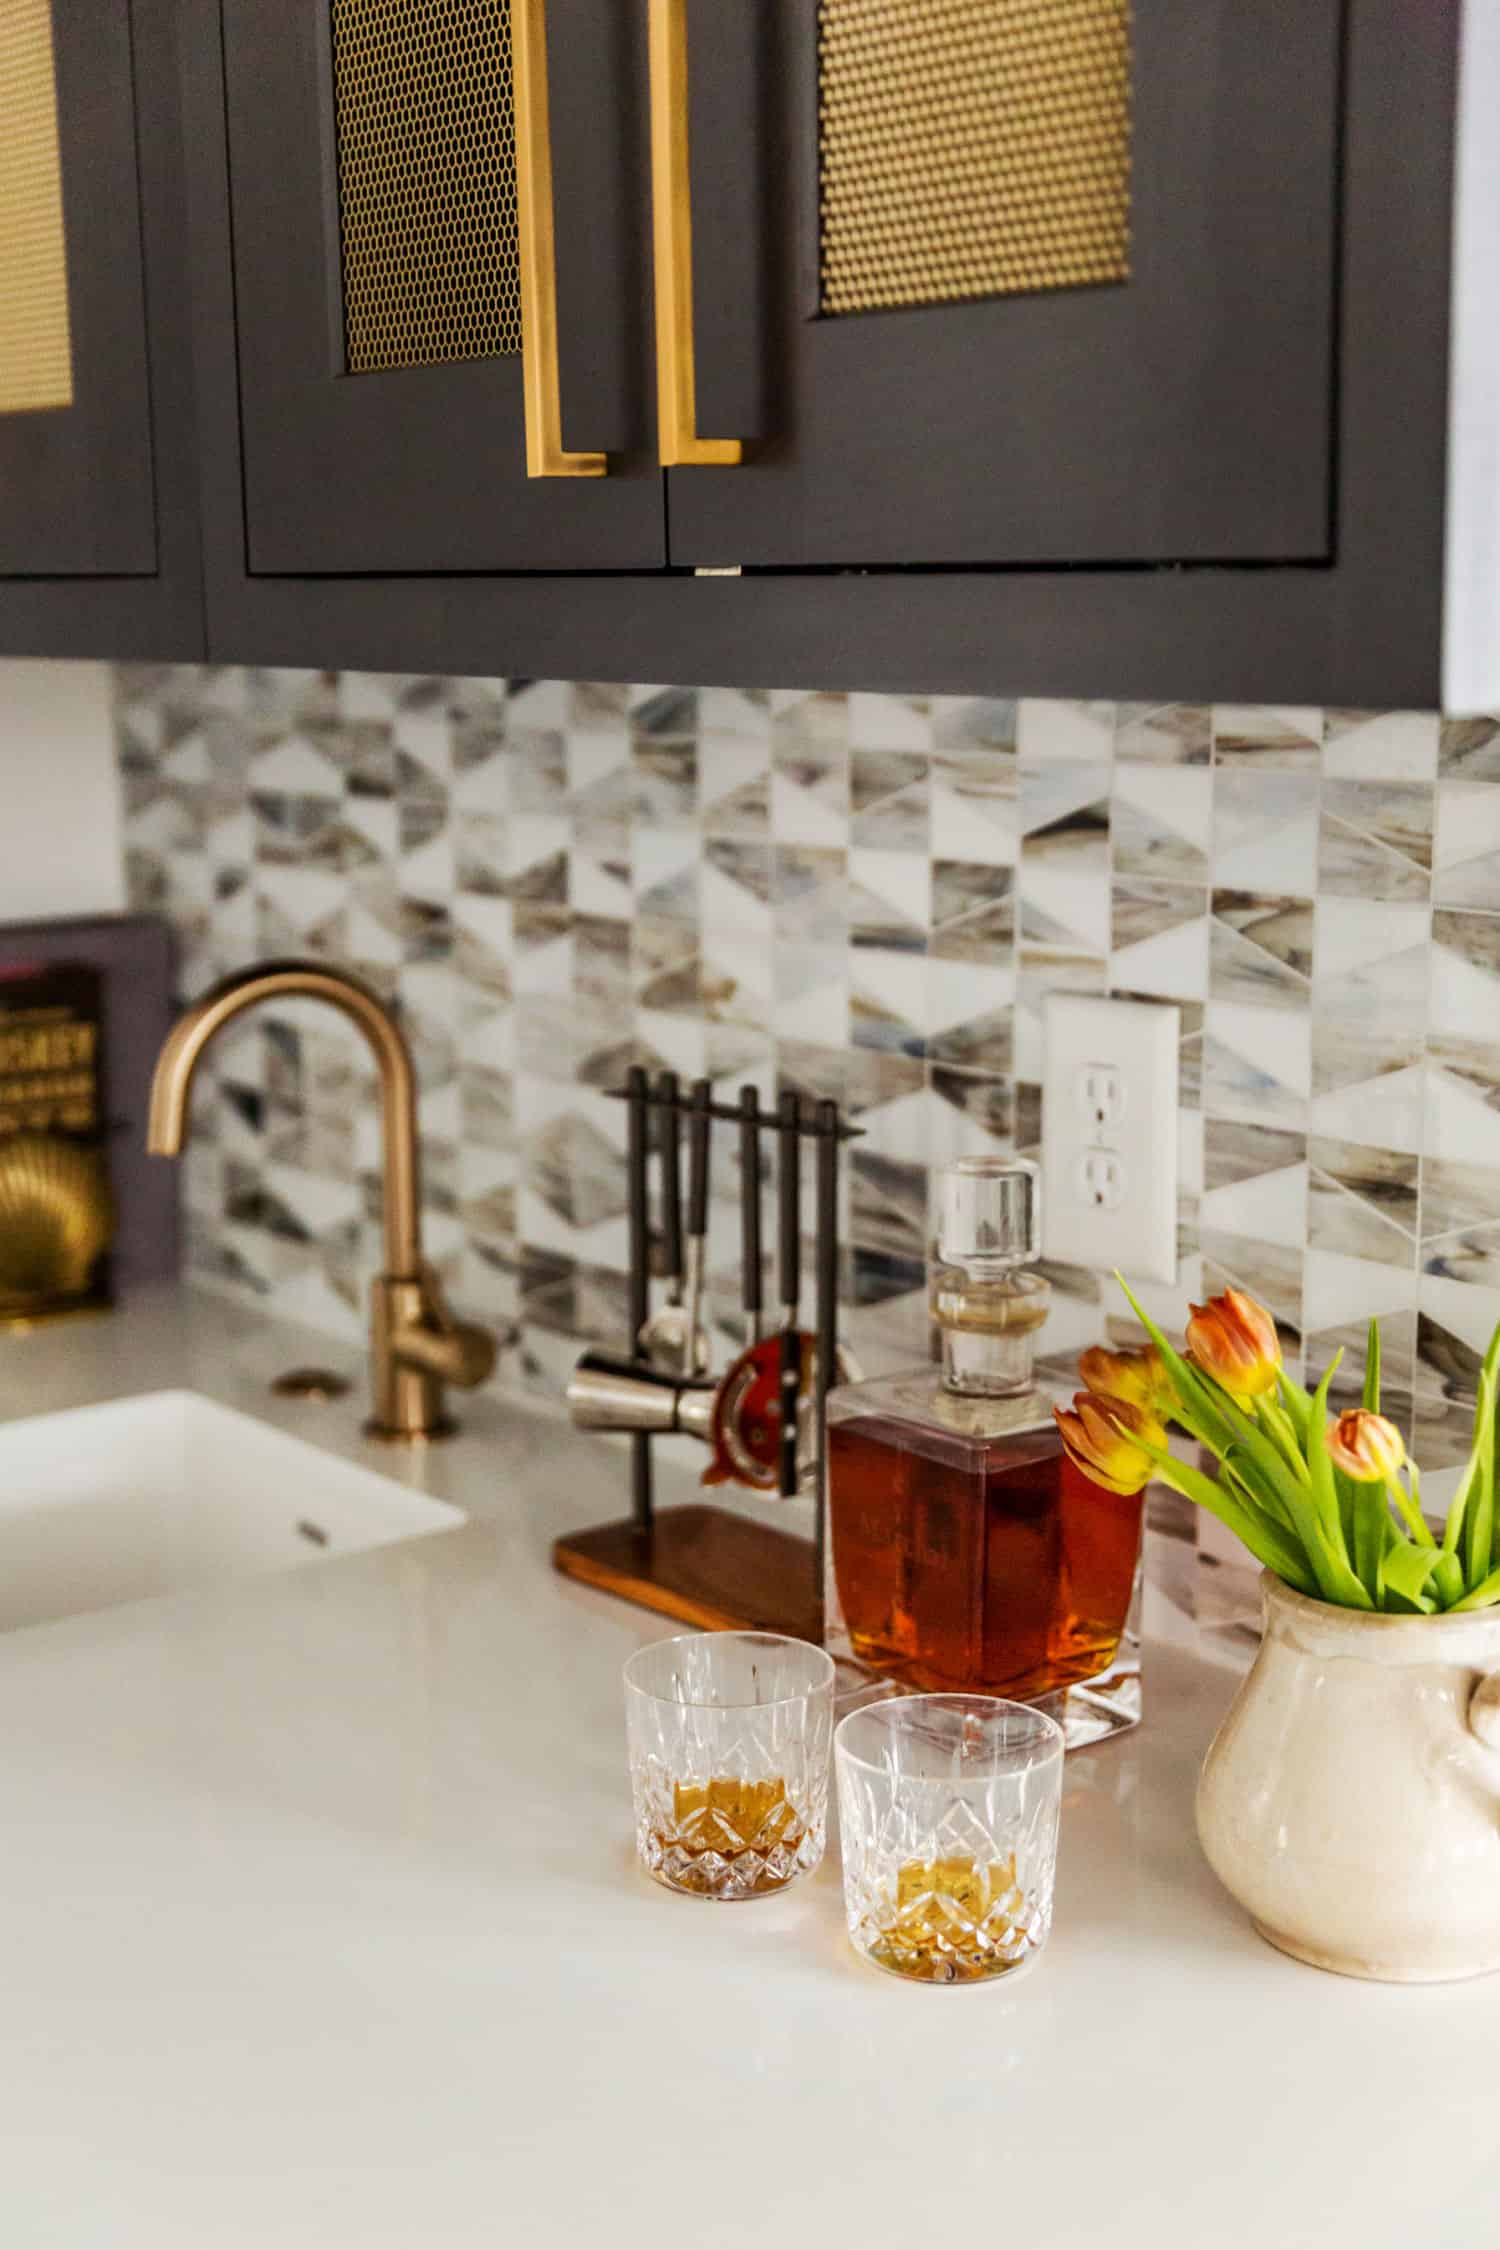 Nicholas Design Build | Remodel a kitchen with black cabinets and gold accents.